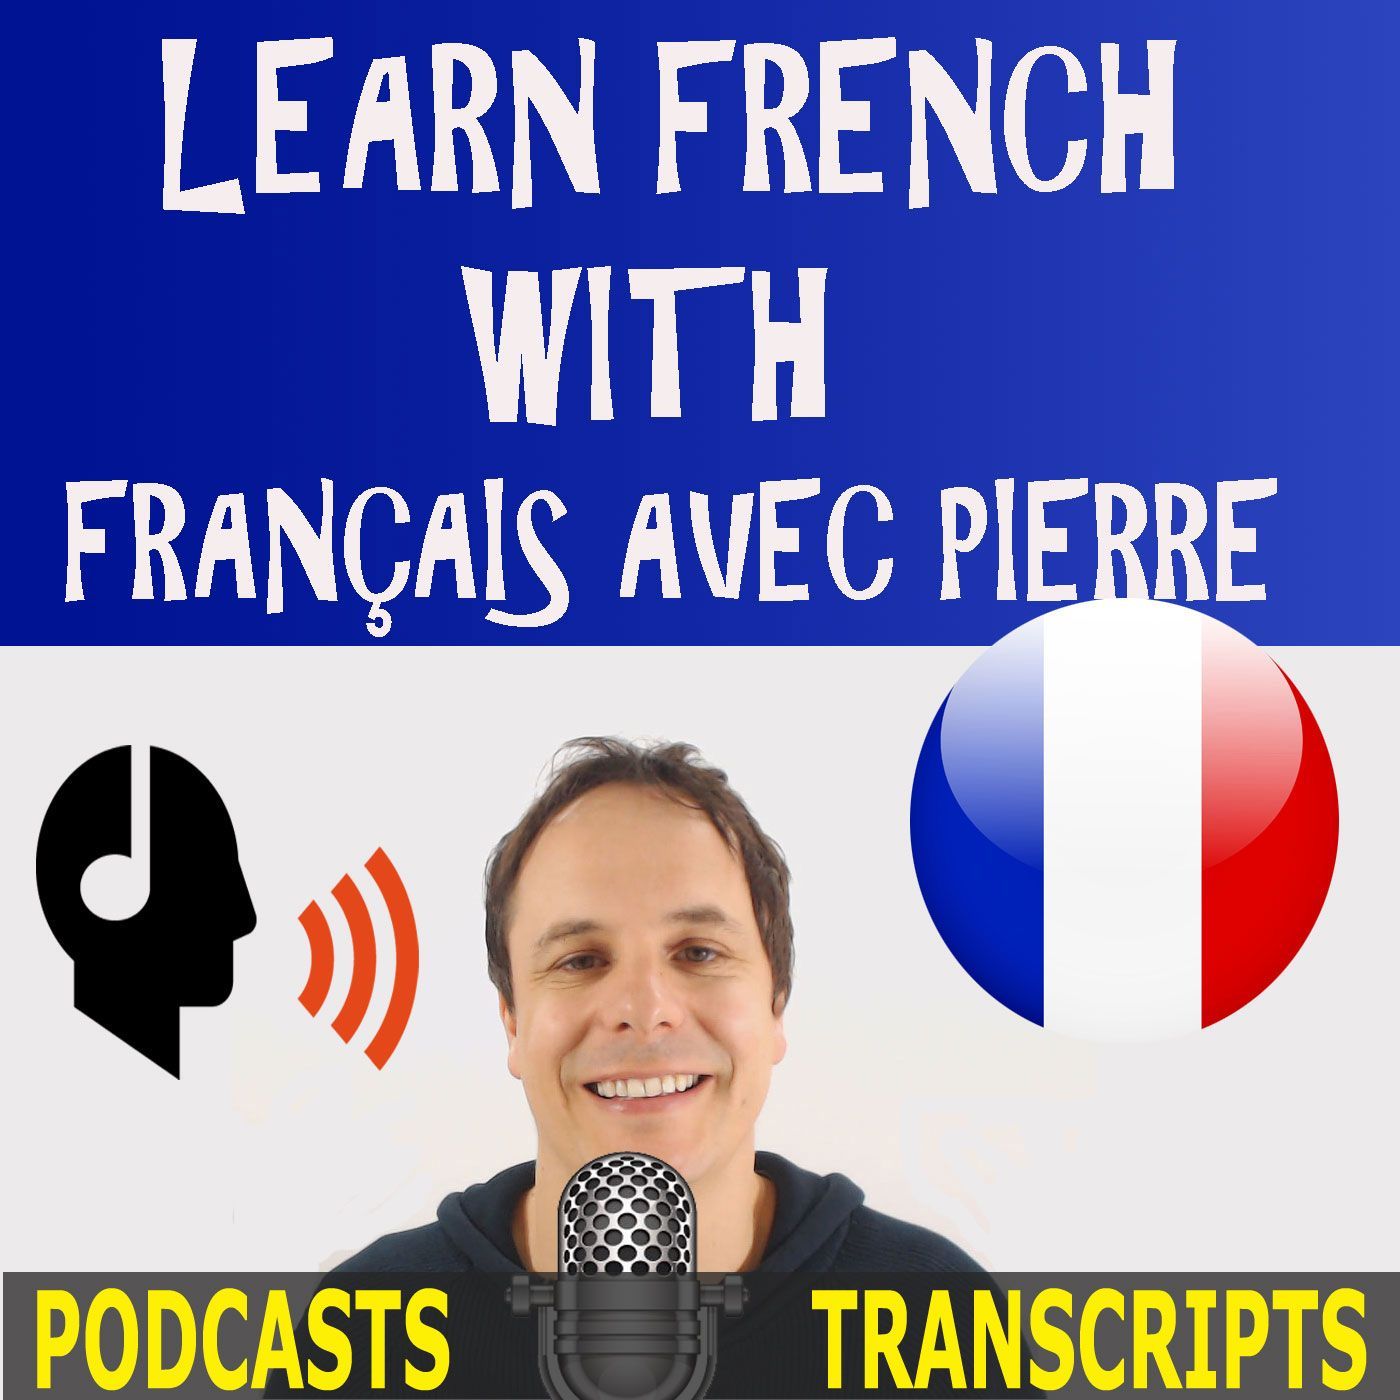 Learn French with French Podcasts - Français avec Pierre artwork